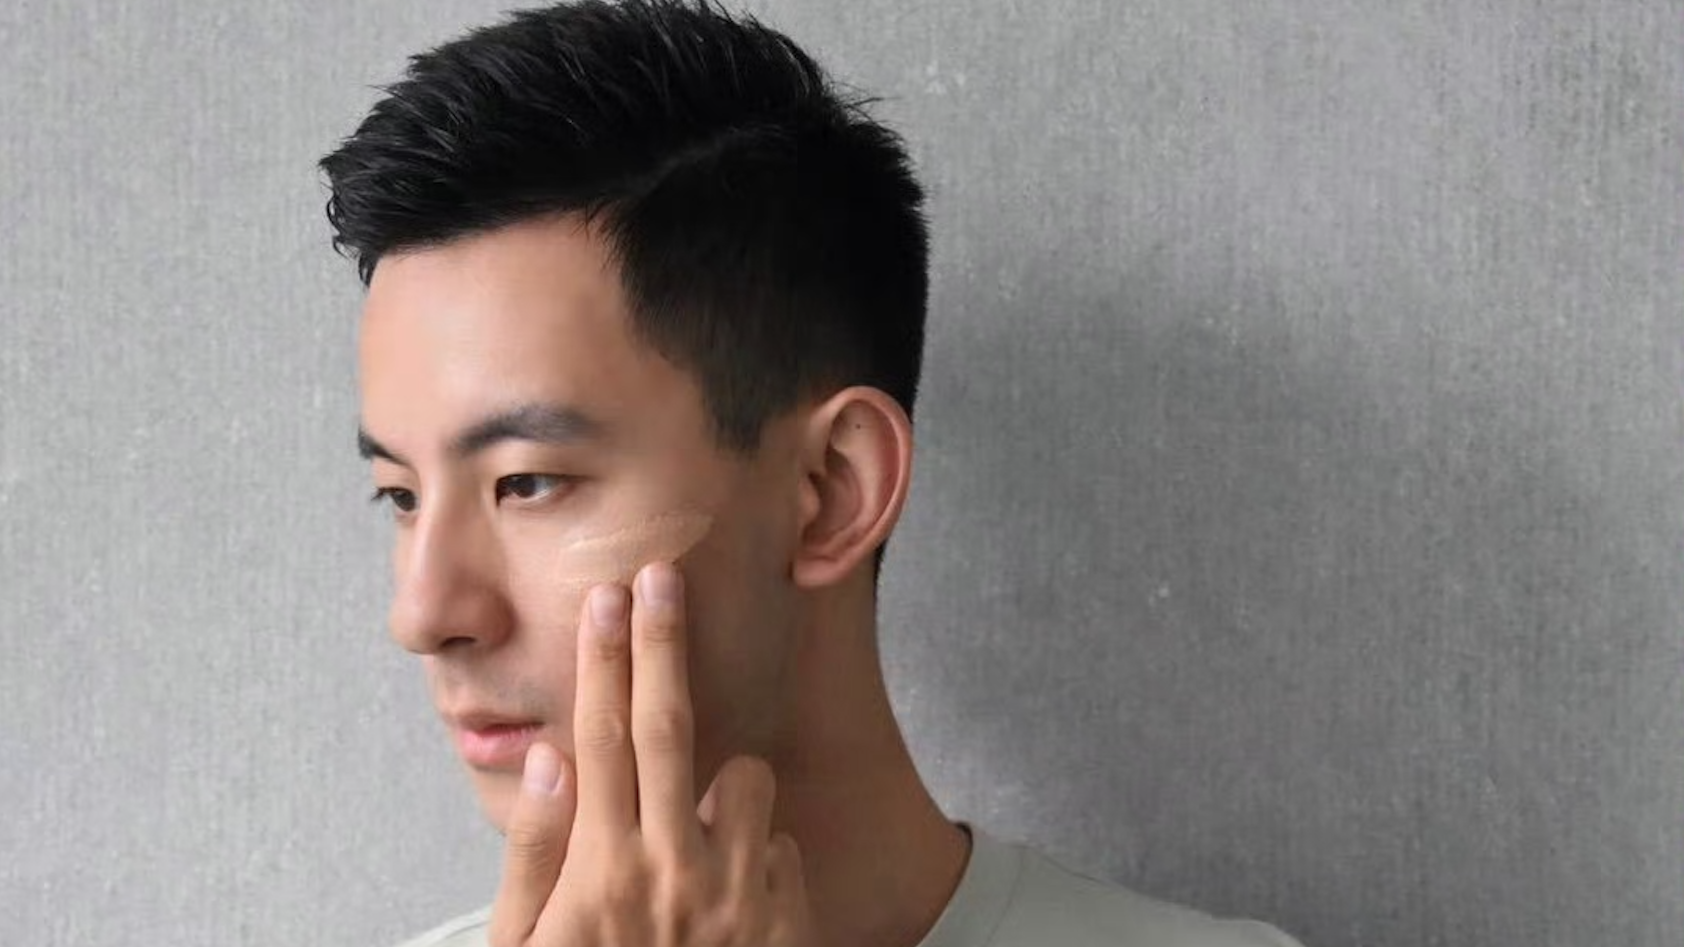 Delve into the demographics and psychographics of male beauty consumers on Douyin to understand how brands can thrive on this burgeoning social commerce platform. Photo: Shakeup